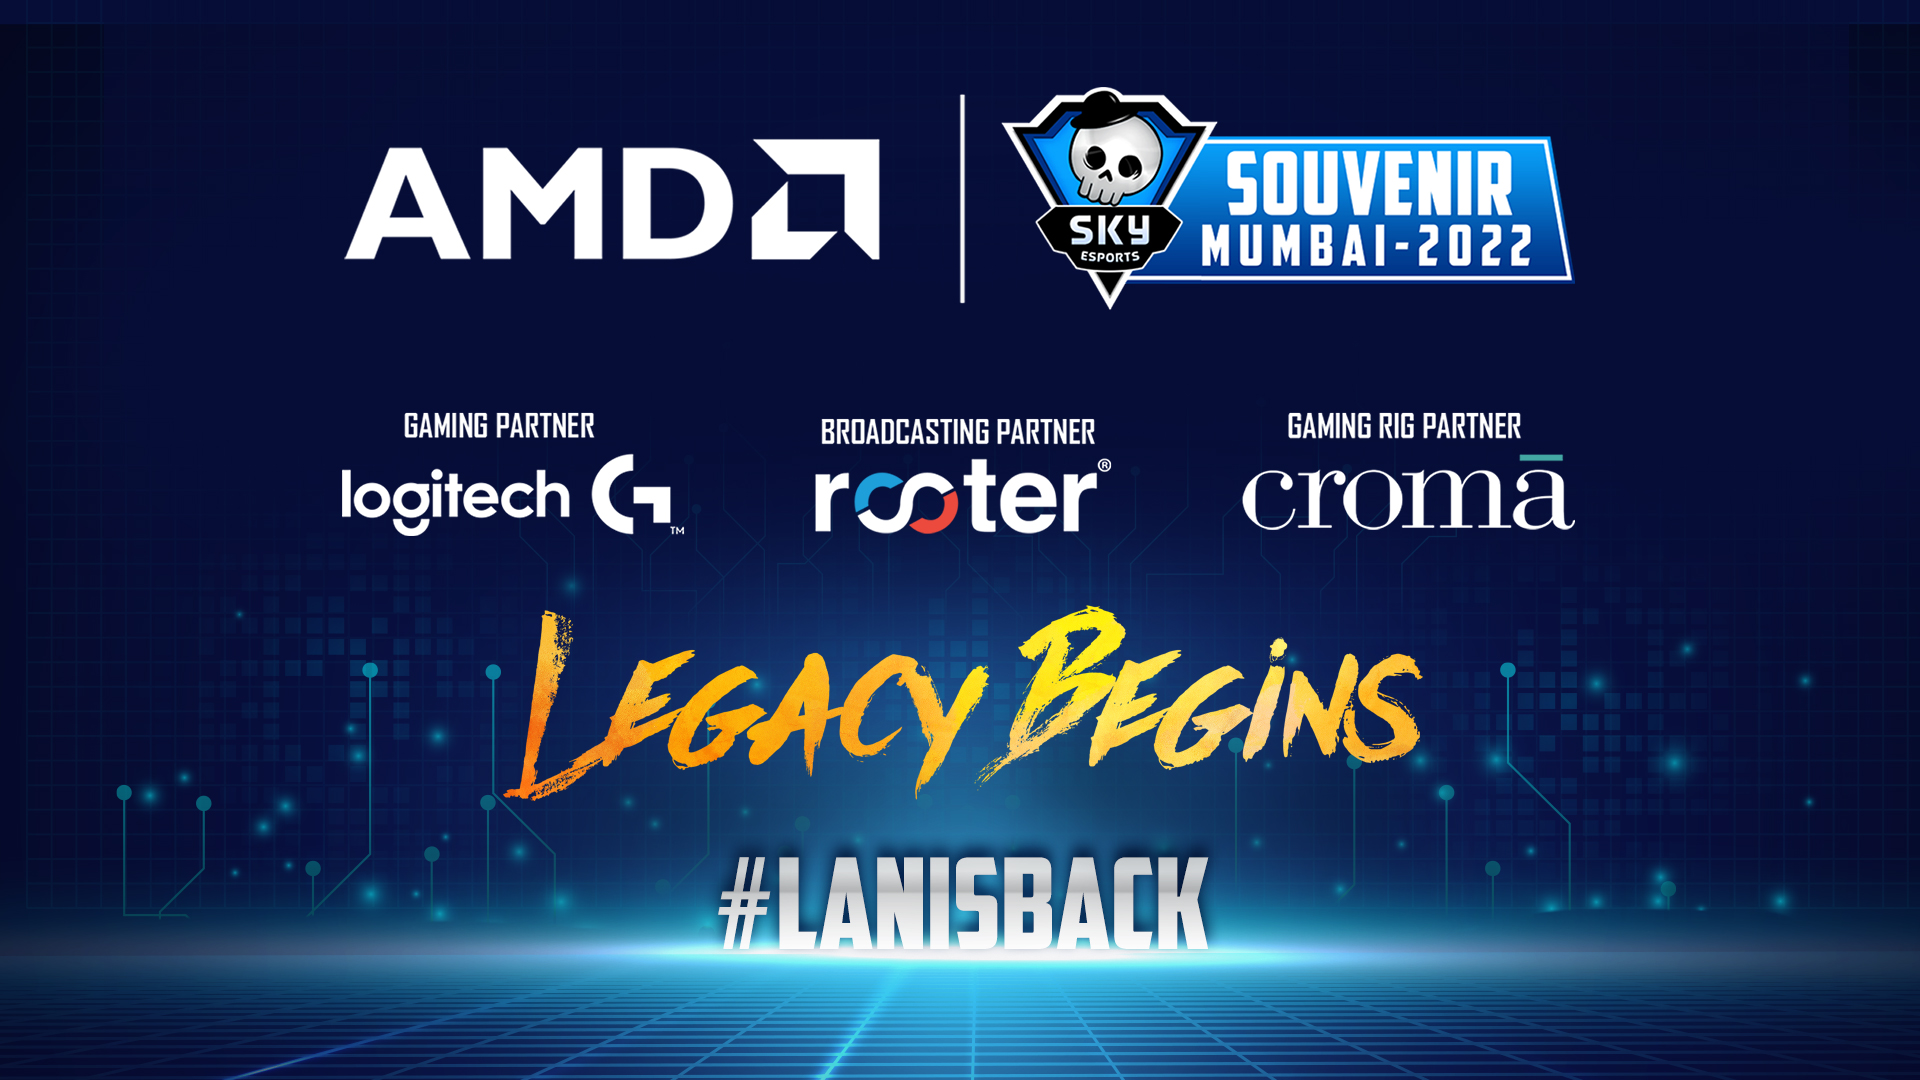 Enigma Gaming and Team Snakes bag surprising victories on Day 1 of India’s first VALORANT LAN event, the AMD Skyesports Souvenir – Mumbai 2022